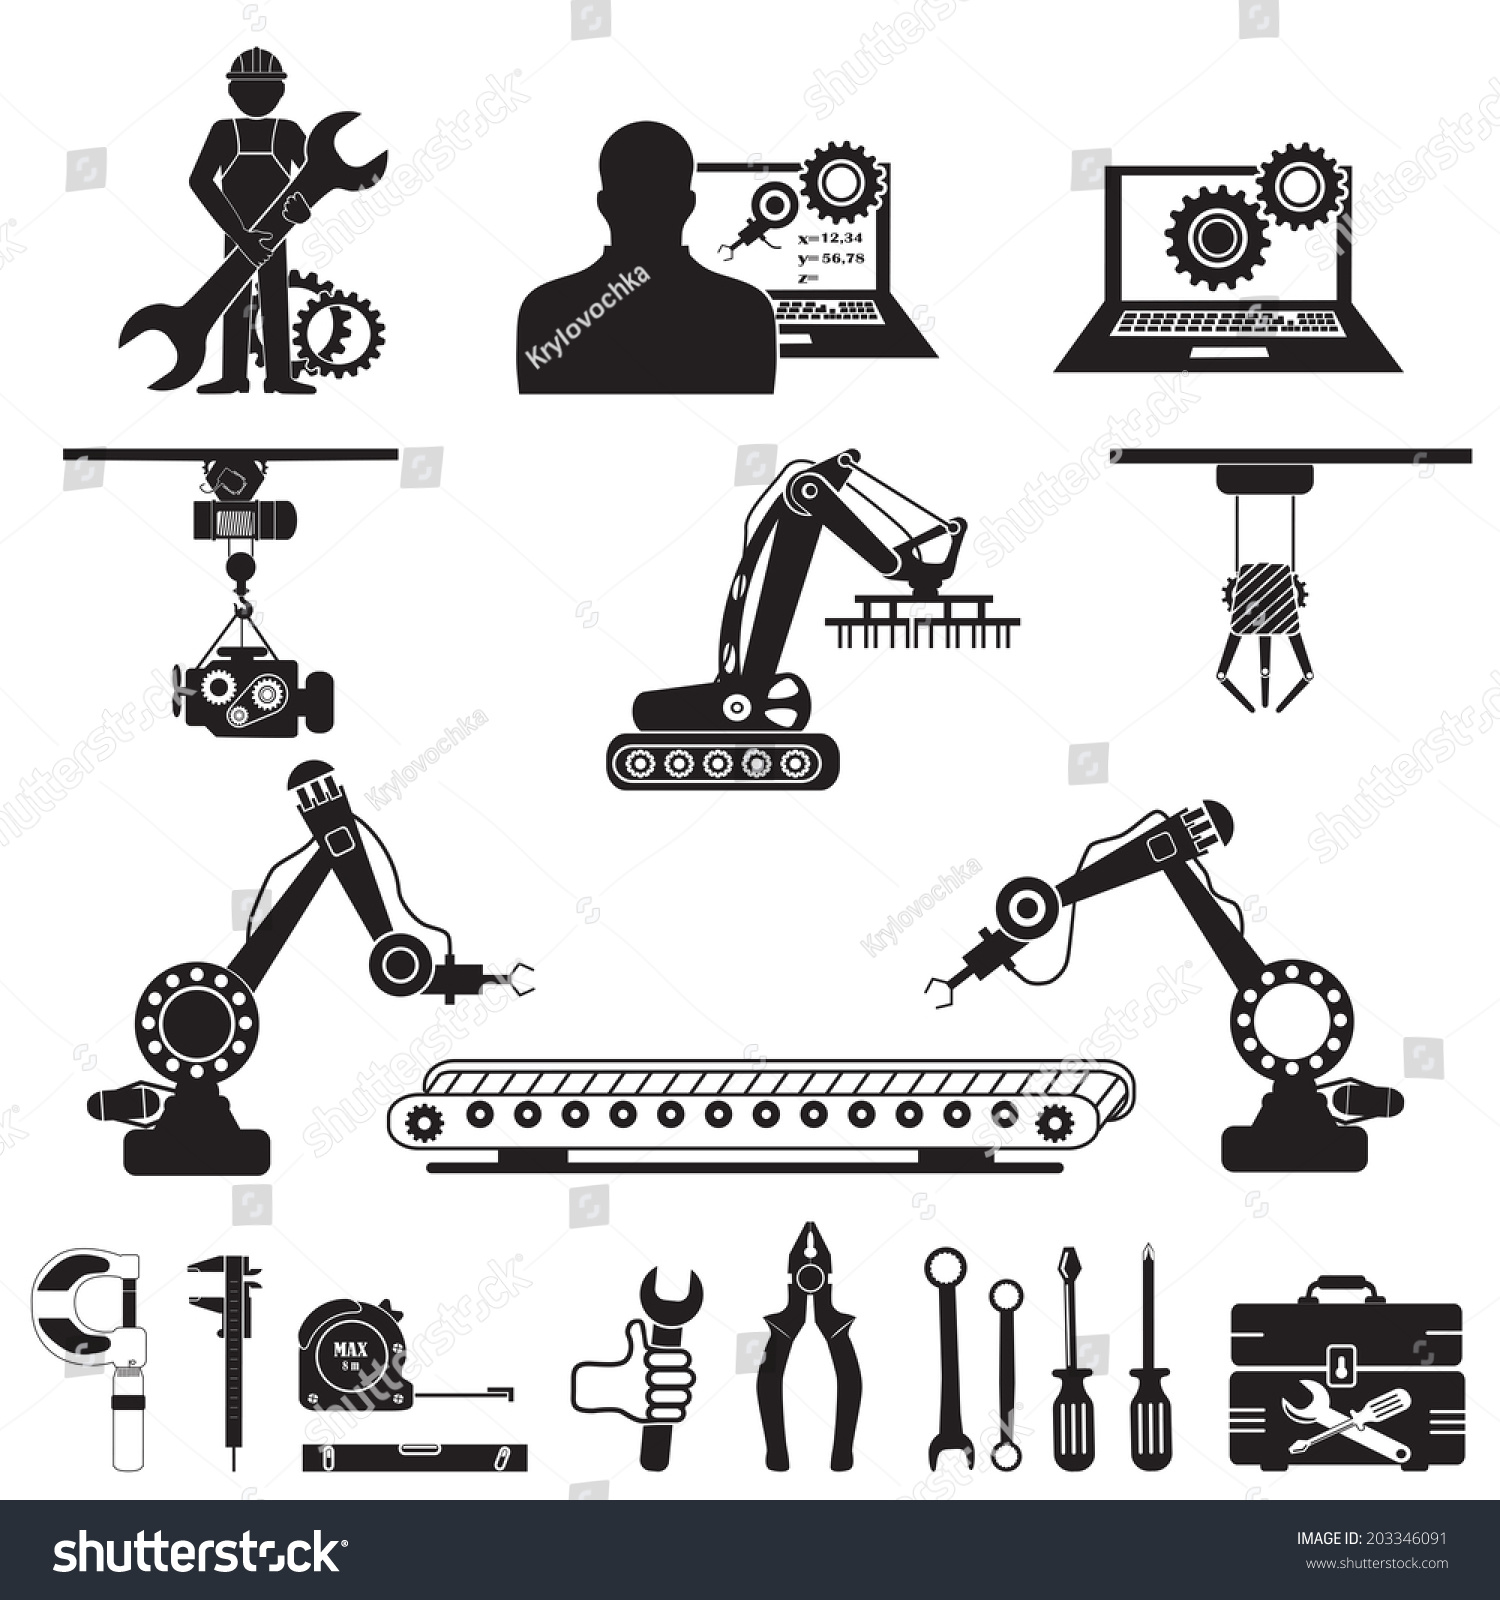 industrial automation clipart - photo #4